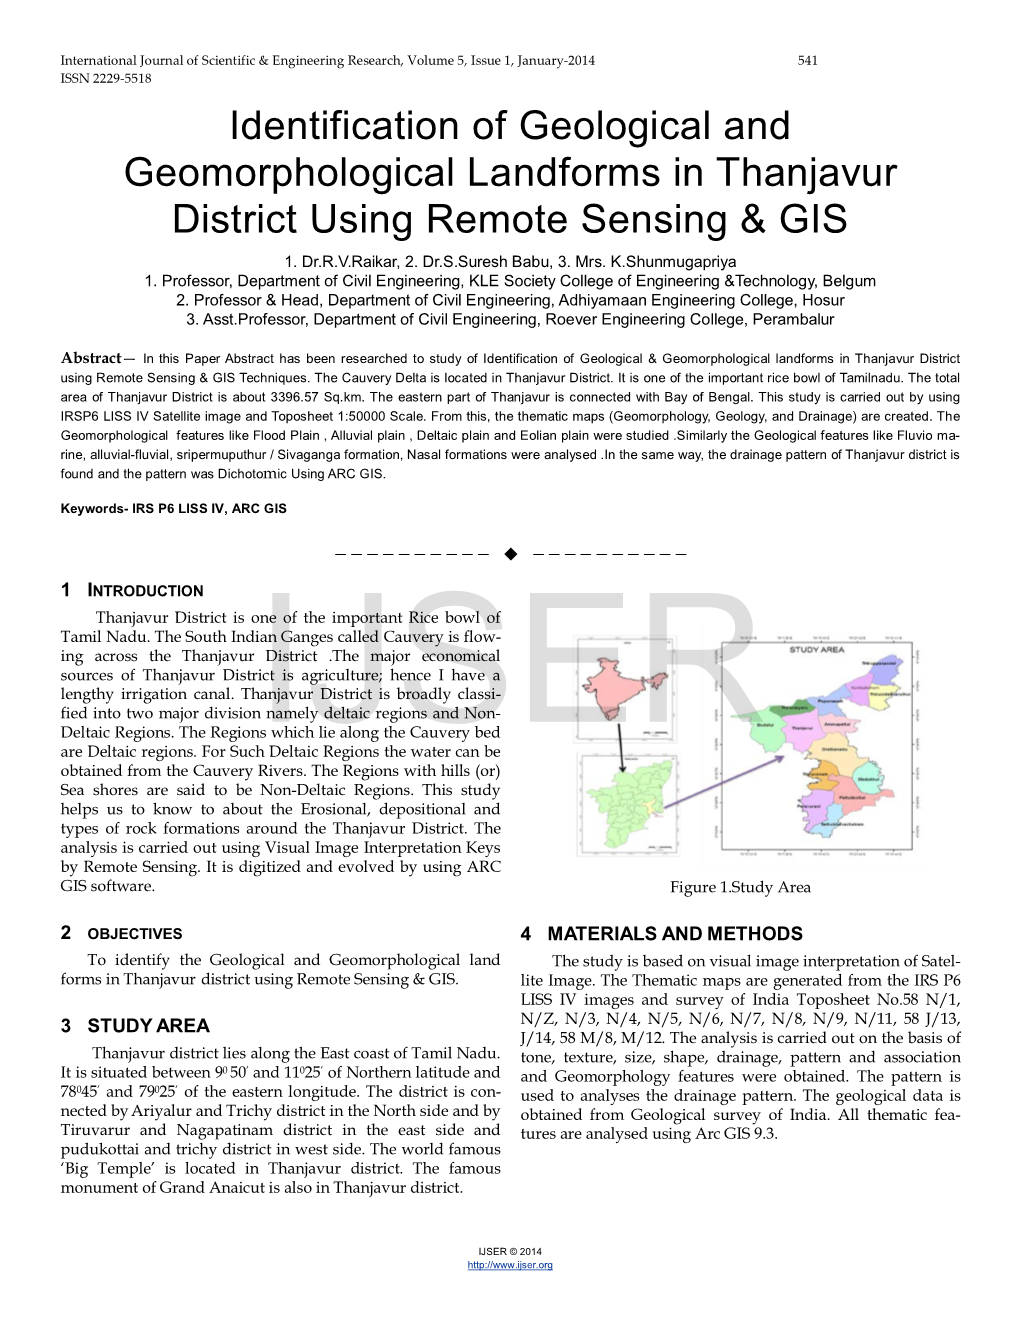 Identification of Geological and Geomorphological Landforms in Thanjavur District Using Remote Sensing &